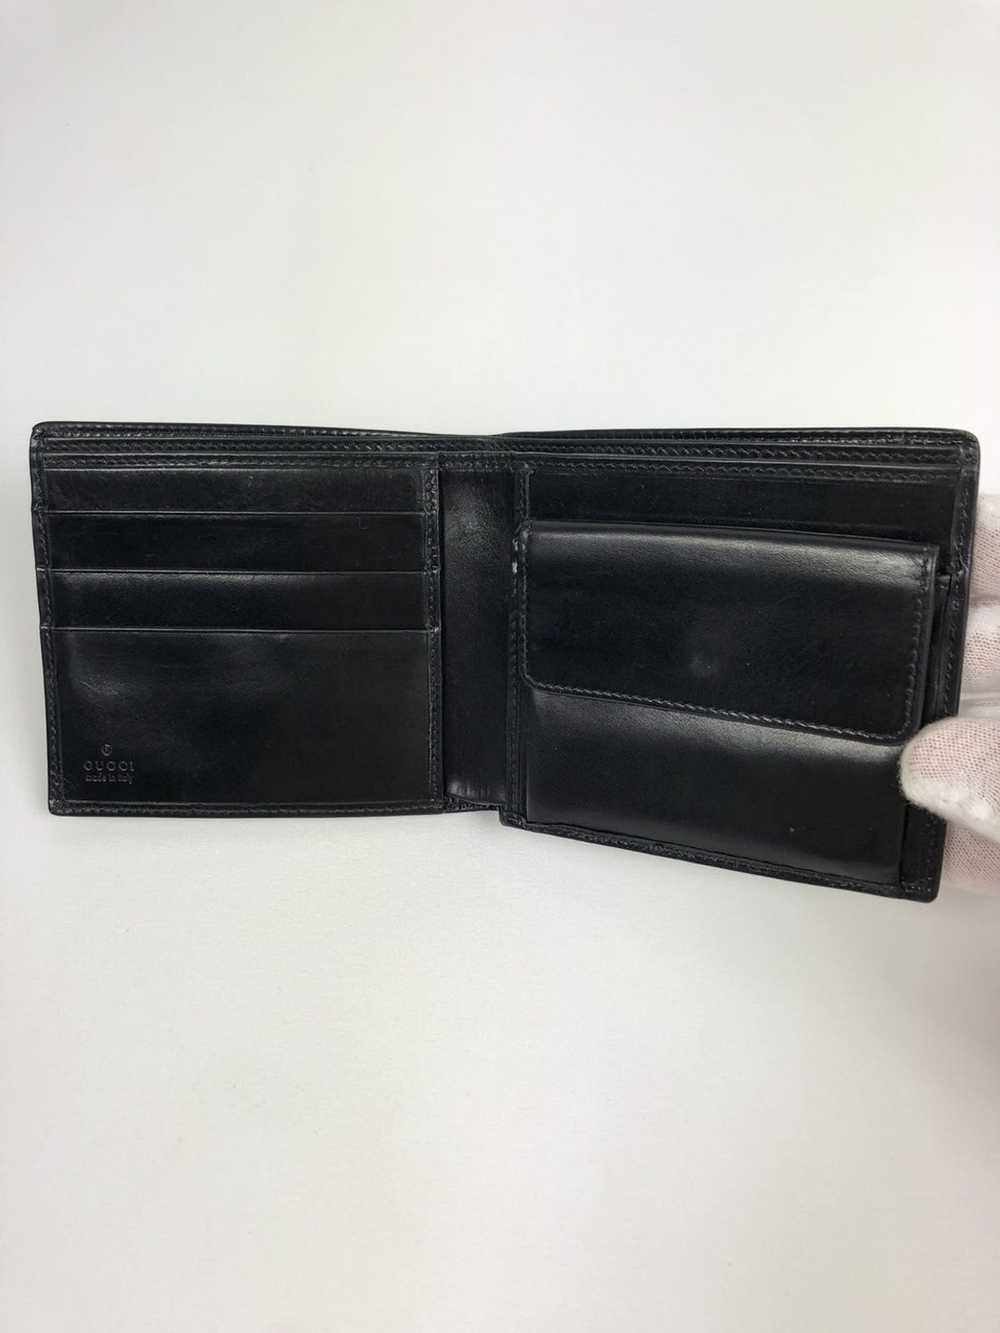 Gucci Gucci G leather bifold wallet - image 4